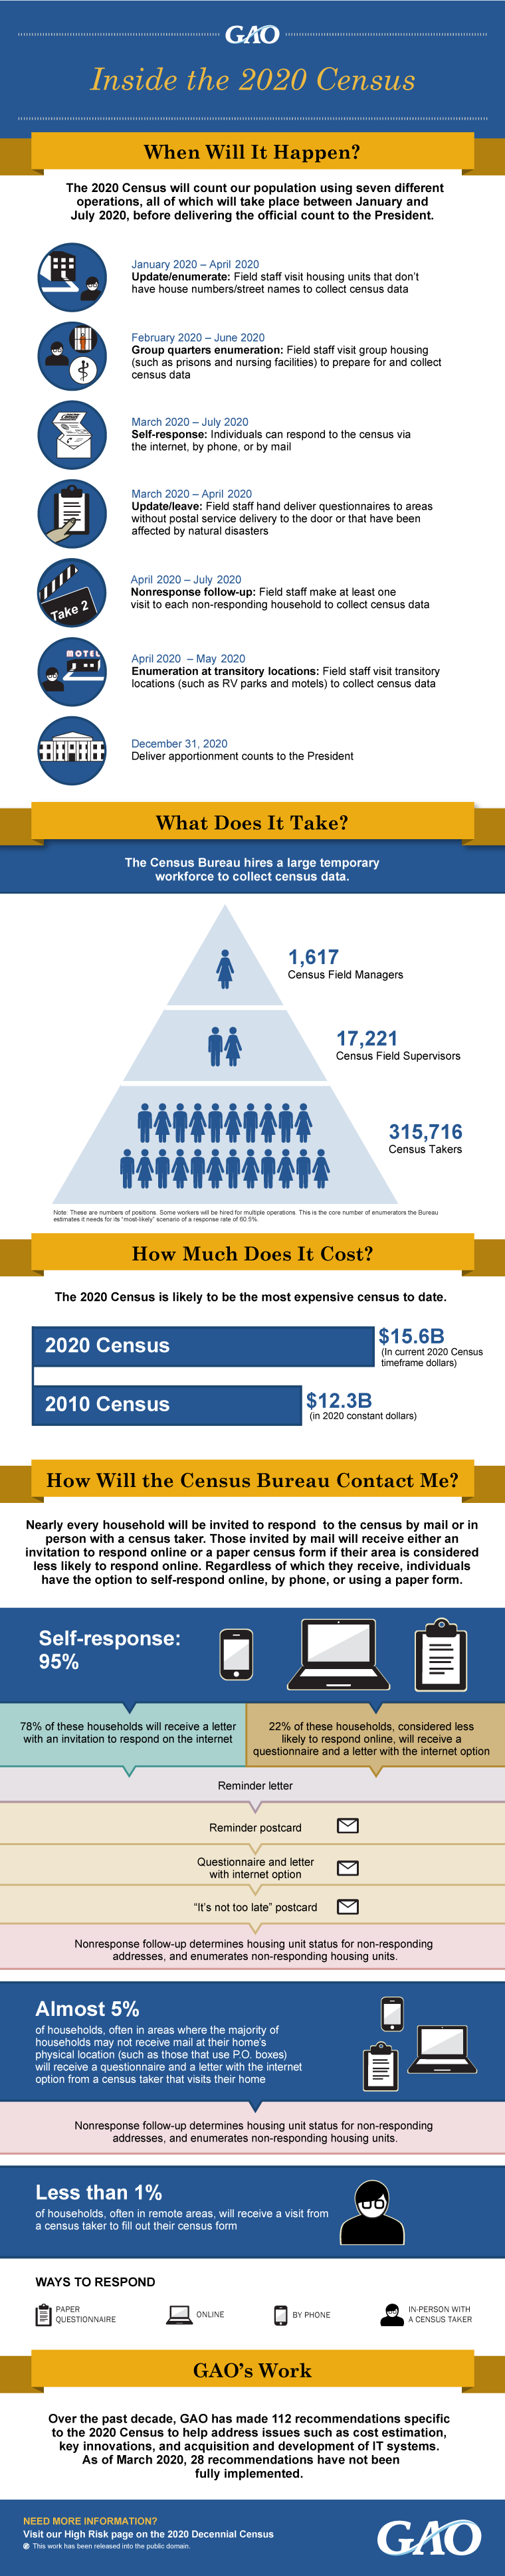 INFOGRAPHIC: Inside the 2020 Census